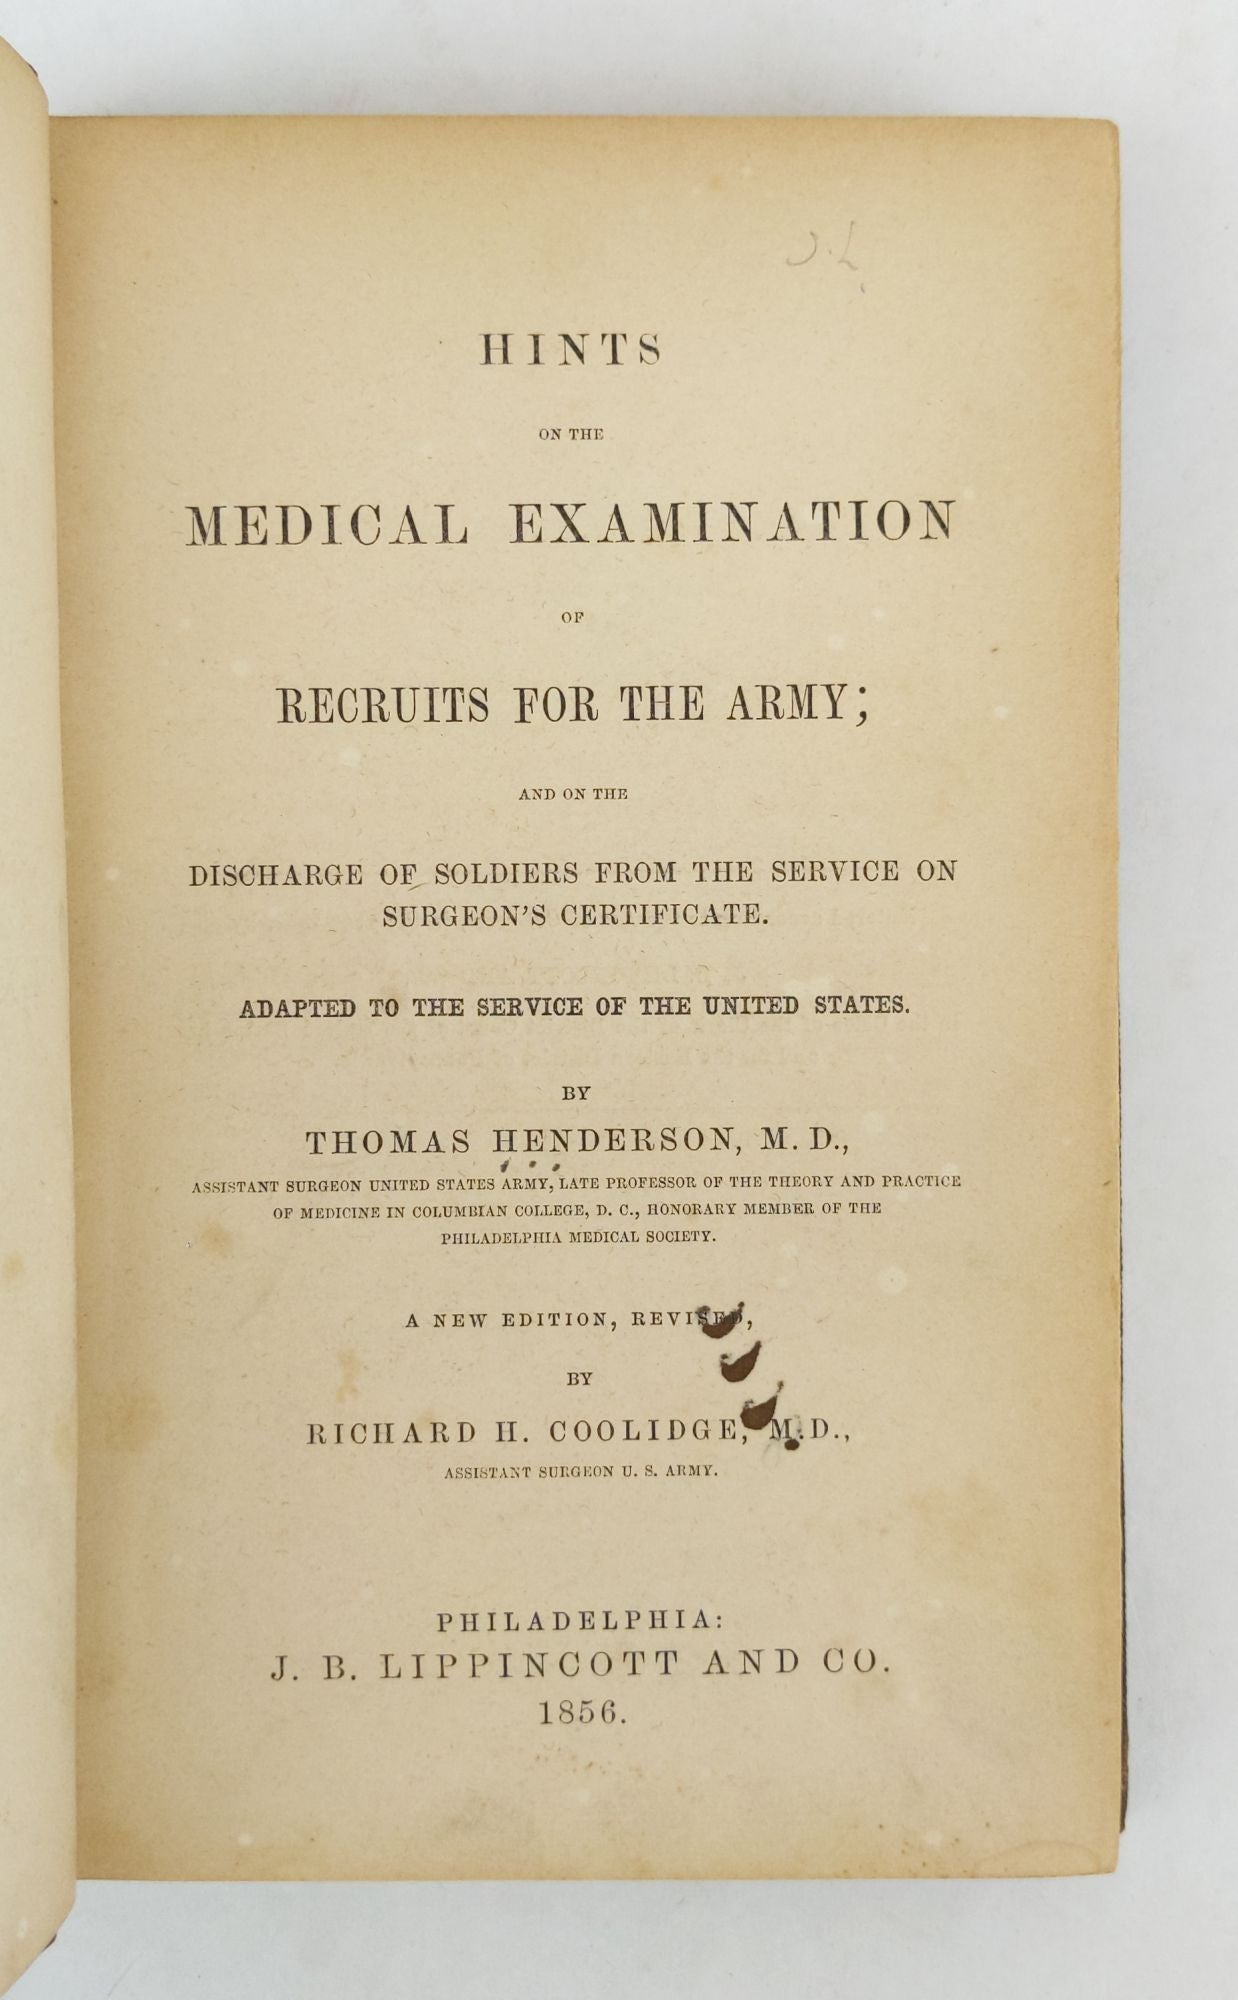 Product Image for HINTS ON THE MEDICAL EXAMINATION OF RECRUITS FOR THE ARMY; AND ON THE DISCHARGE OF SOLDIERS FROM THE SERVICE ON SURGEON'S CERTIFICATE. ADAPTED TO THE SERVICE OF THE UNITED STATES